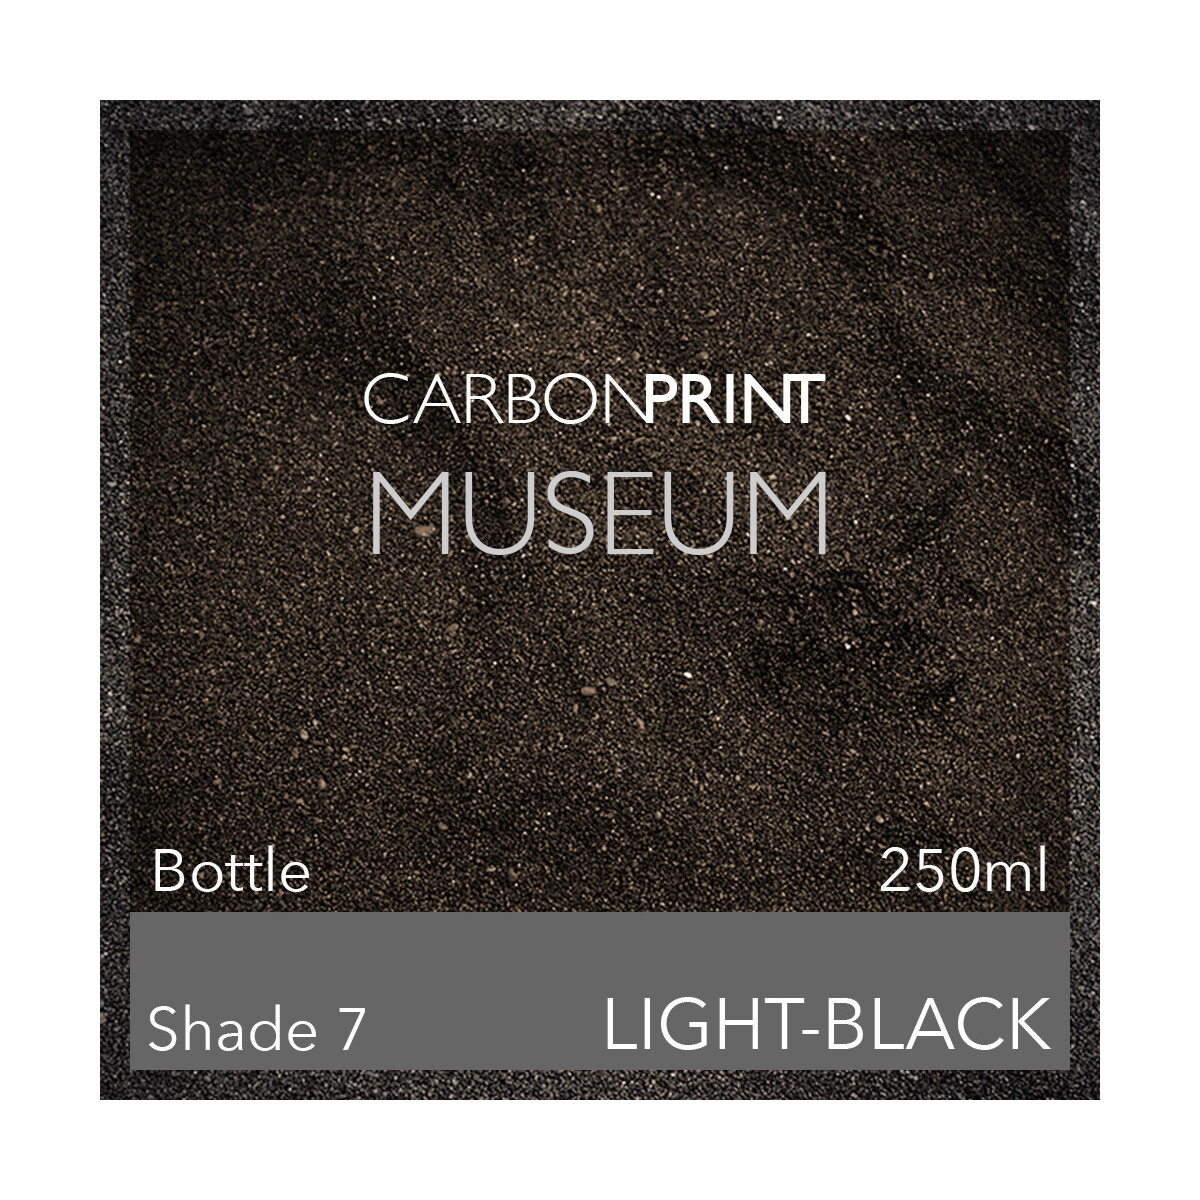 Carbonprint Museum Shade7 Channel LK / GY 250ml